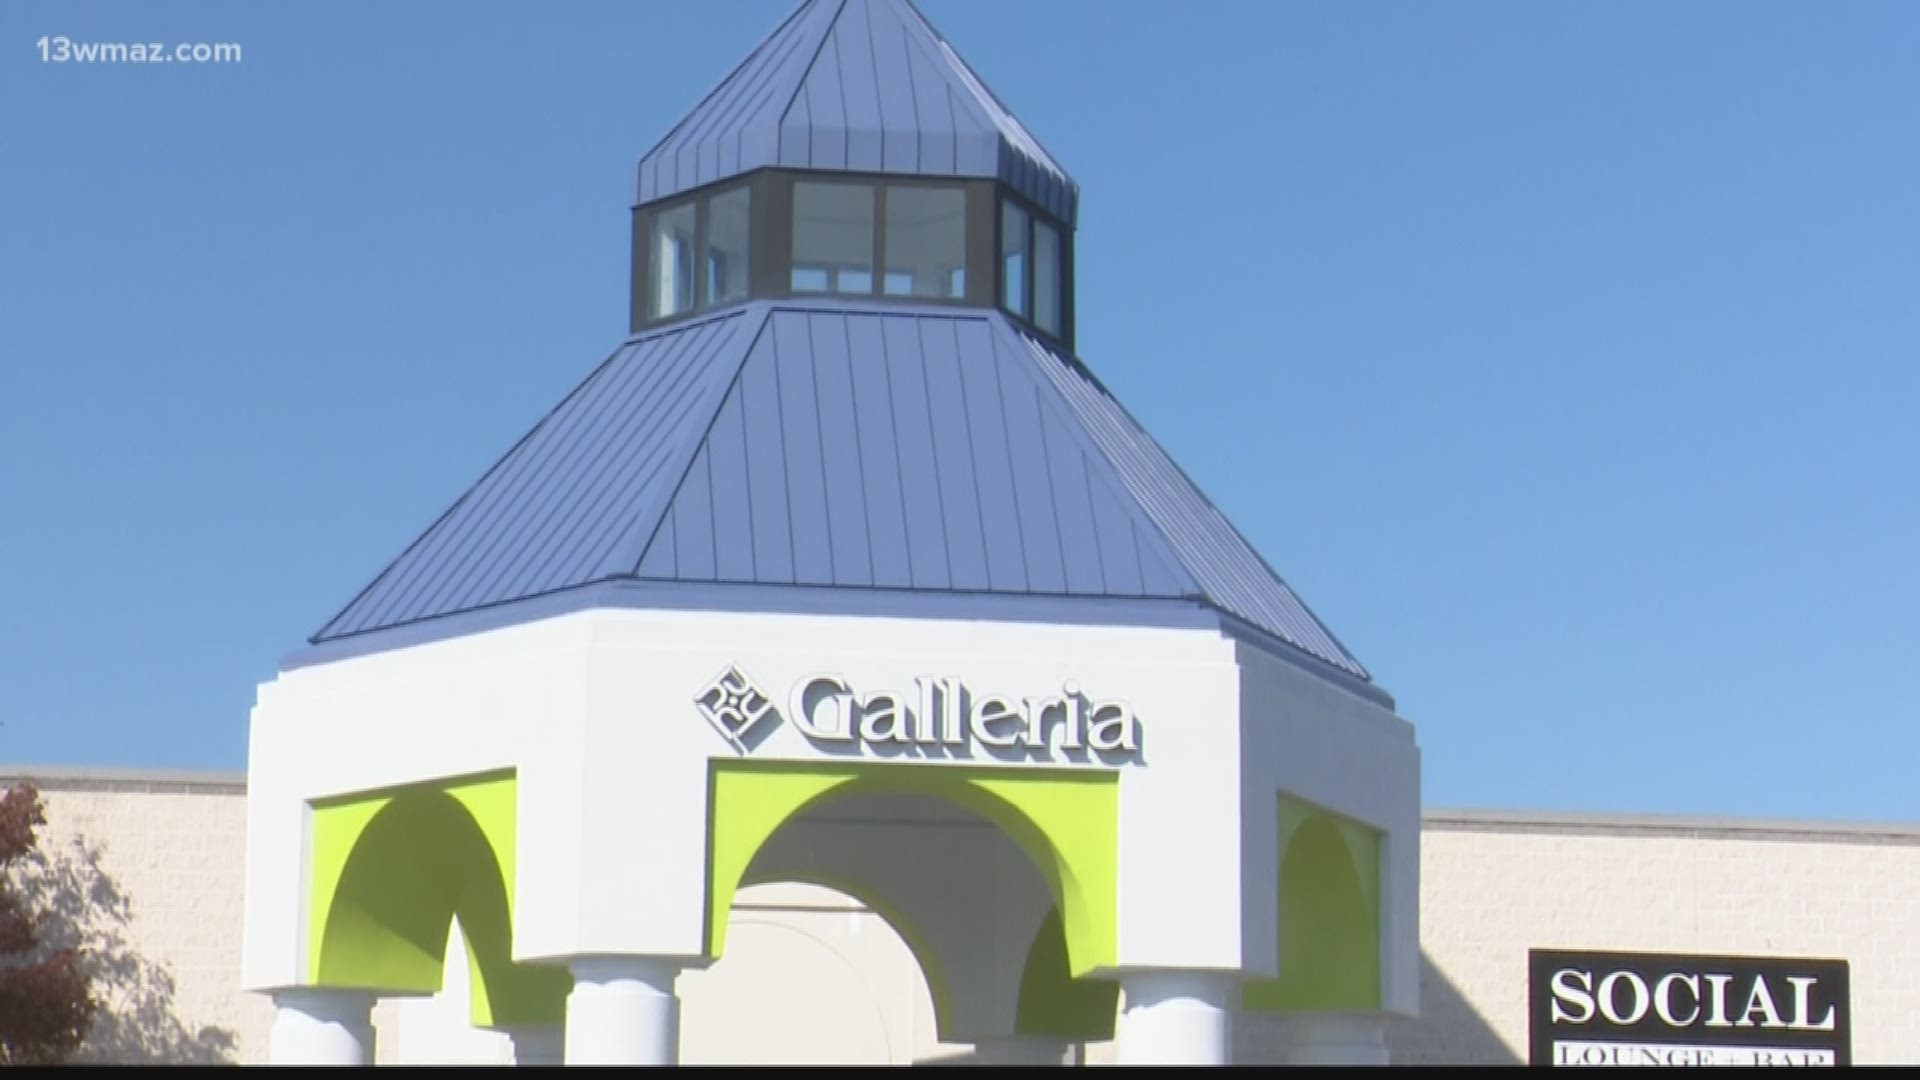 Shoppers who are out getting a head-start on those holiday deals might notice some changes at the Houston County Galleria.